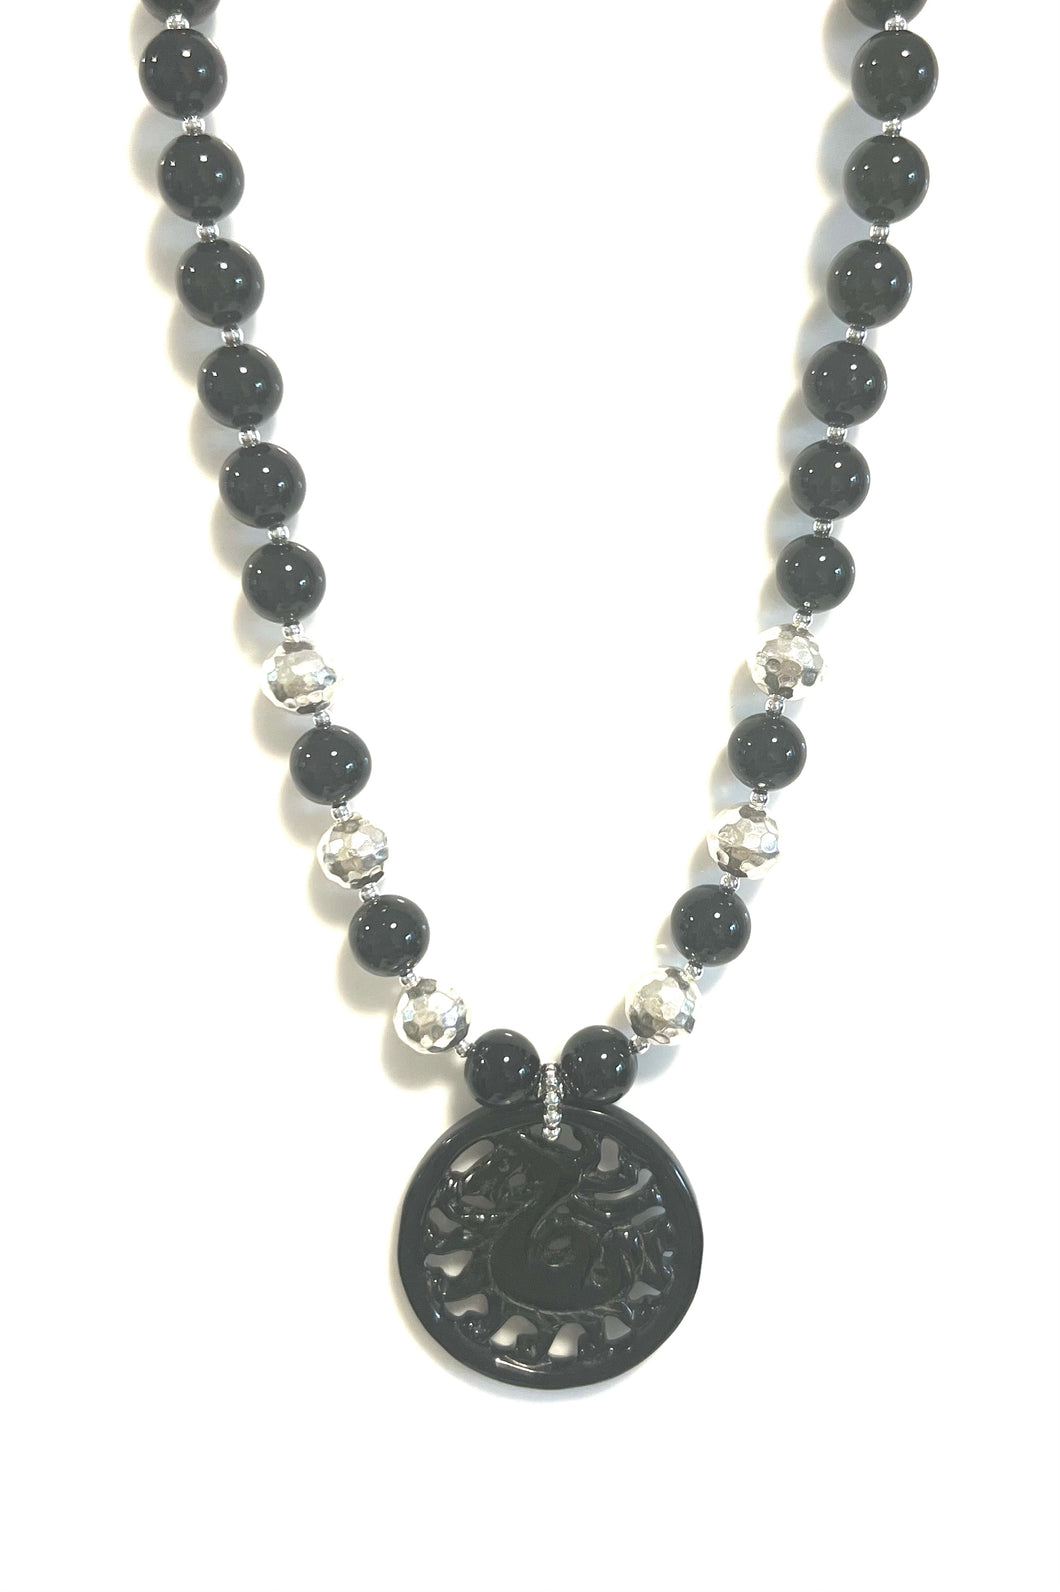 Australian Handmade Black Necklace with Black Onyx Beads Carved Onyx Pendant and Sterling Silver